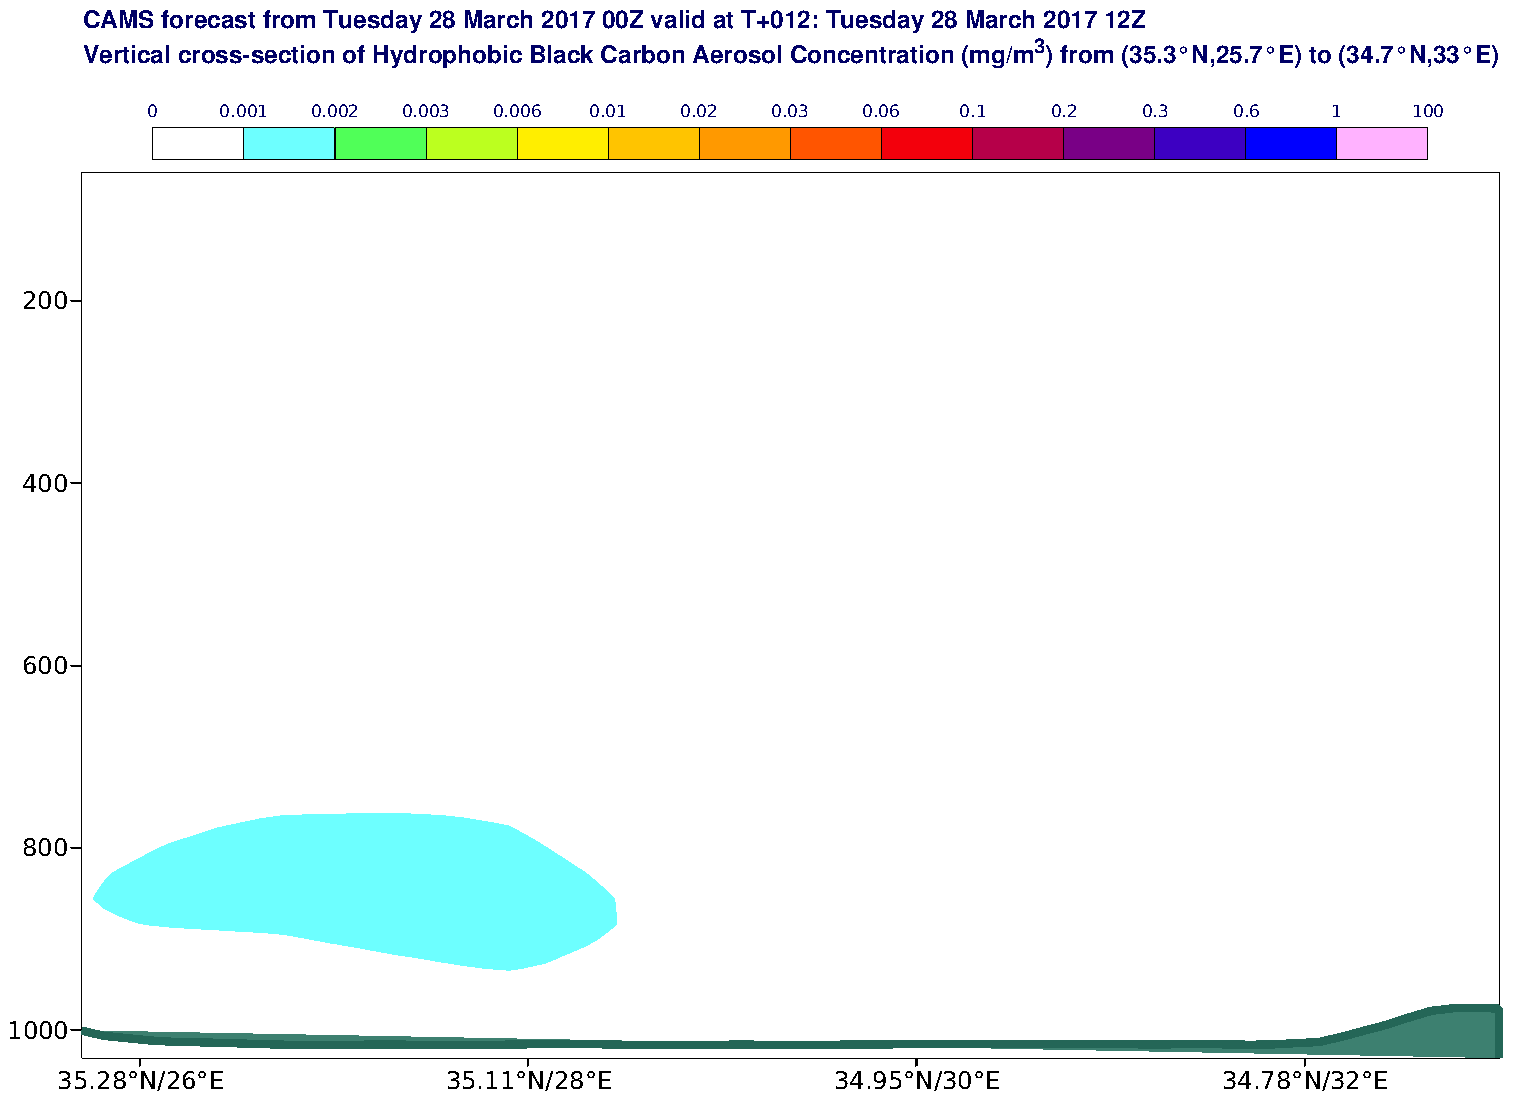 Vertical cross-section of Hydrophobic Black Carbon Aerosol Concentration (mg/m3) valid at T12 - 2017-03-28 12:00